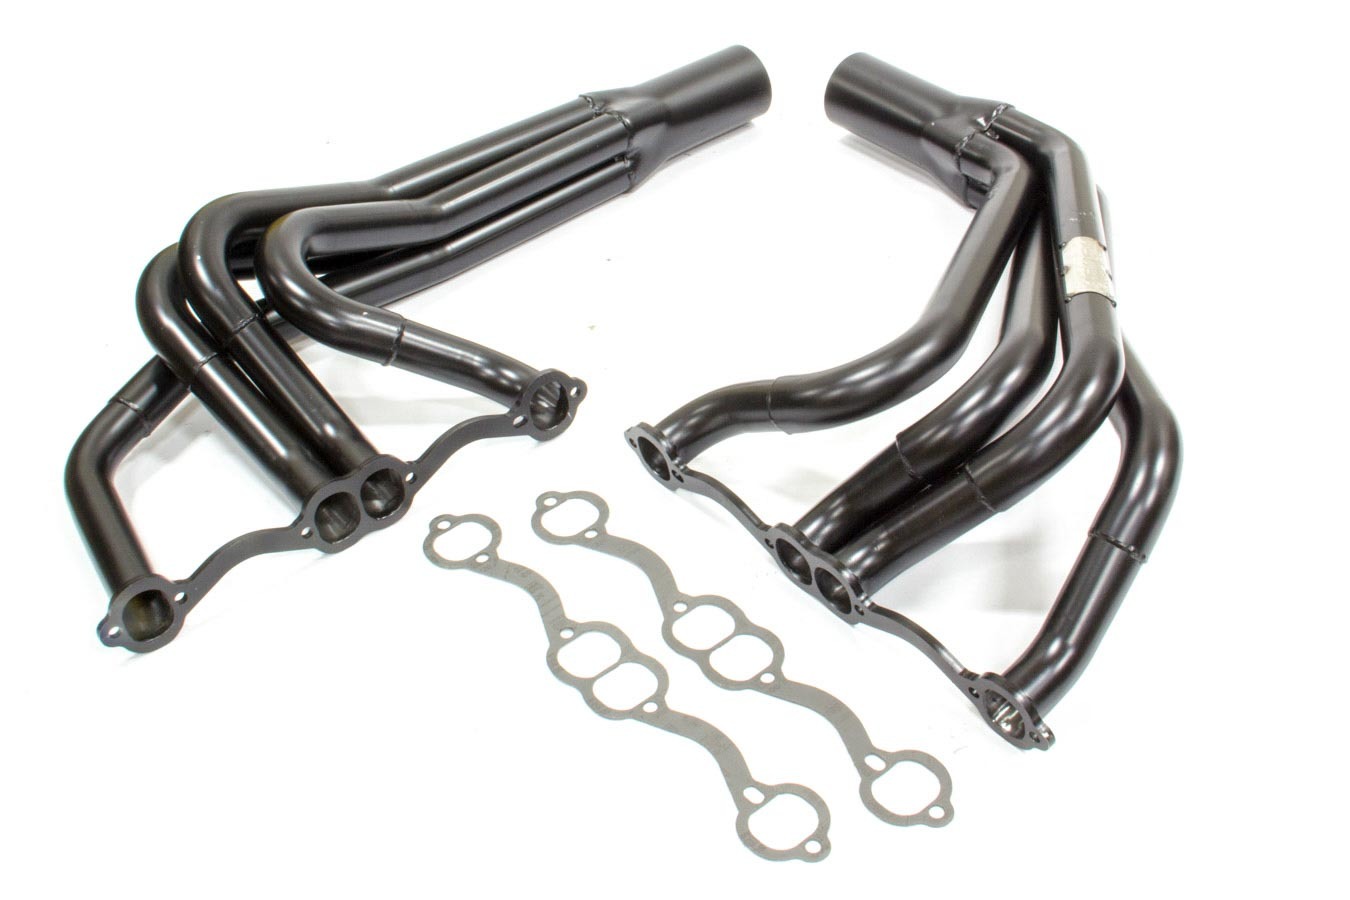 Beyea Headers IDM-23S2-B Headers, IMCA-UMP Modified, 1-3/4 to 1-7/8 in Primary, 3-1/2 in Collector, Steel, Black Paint, Small Block Chevy, Pair